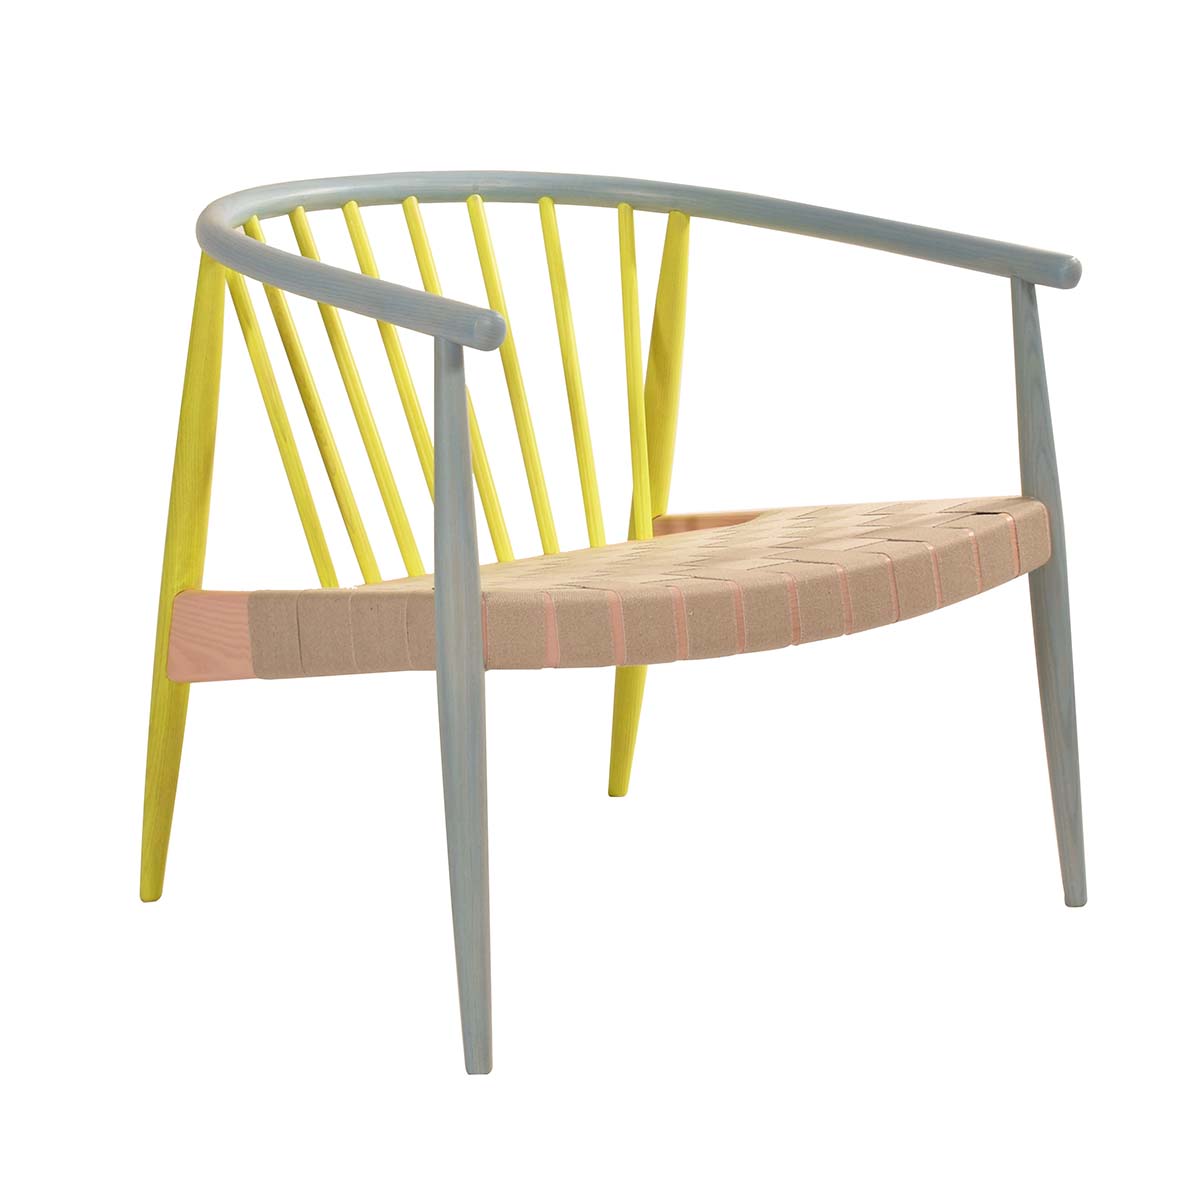 This chair has a unique colour combination, using neon yellow, grey and beige. However, the interest of its shape ties it all together seamlessly. This is your key to making your home look contemporary and cool.